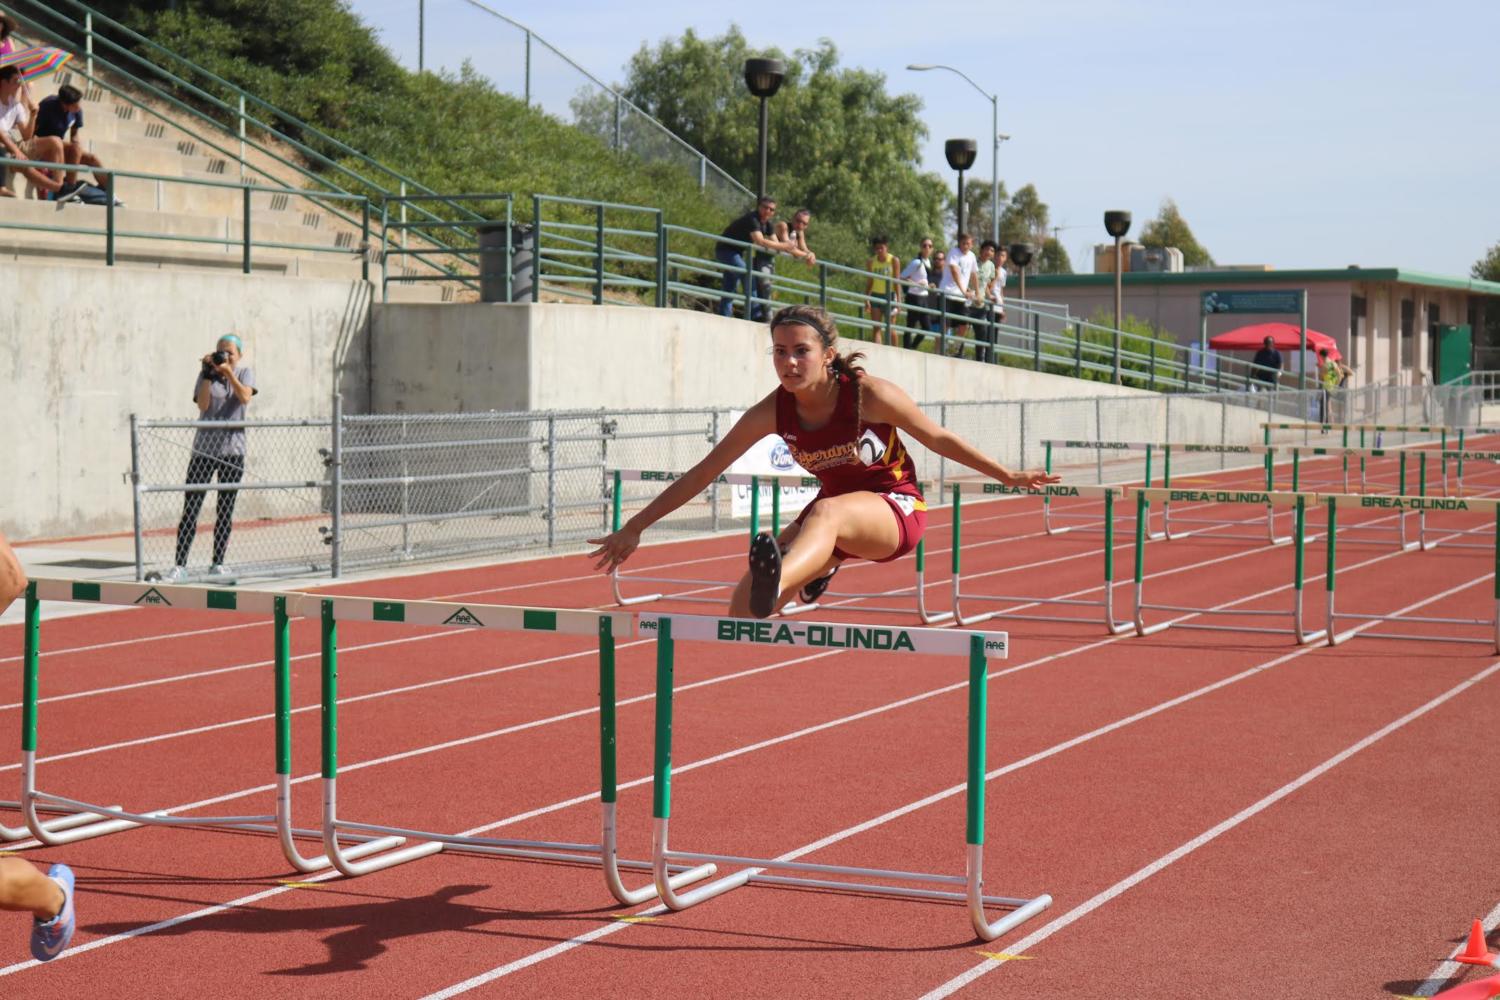 Junior%2C+Jacqueline+Chavez+jumping+over+a+hurdle+during+the+race.